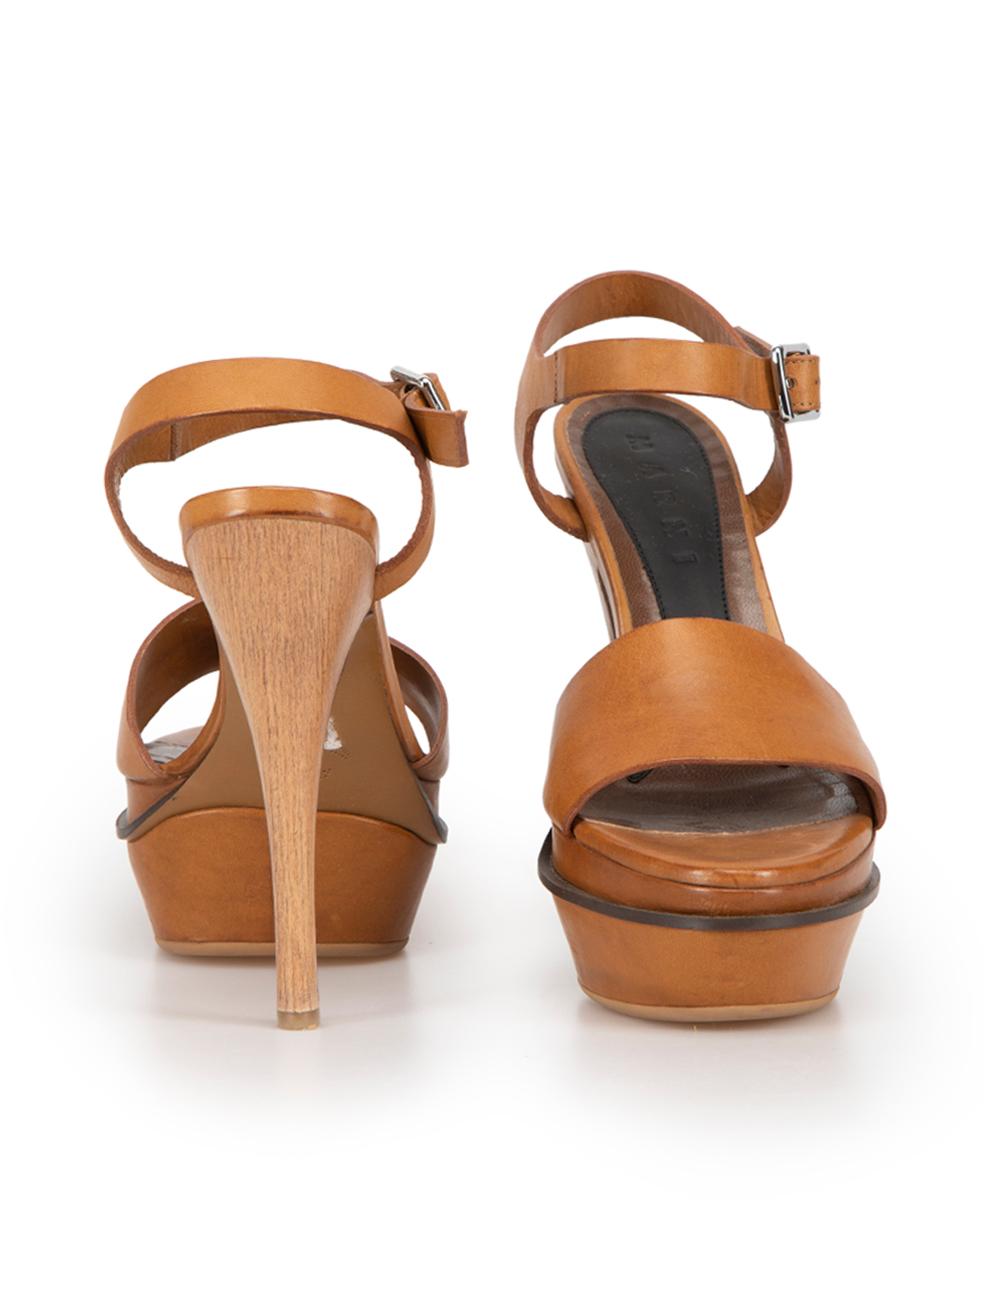 Marni Brown Leather Platform Sandals Size IT 37.5 In Good Condition For Sale In London, GB